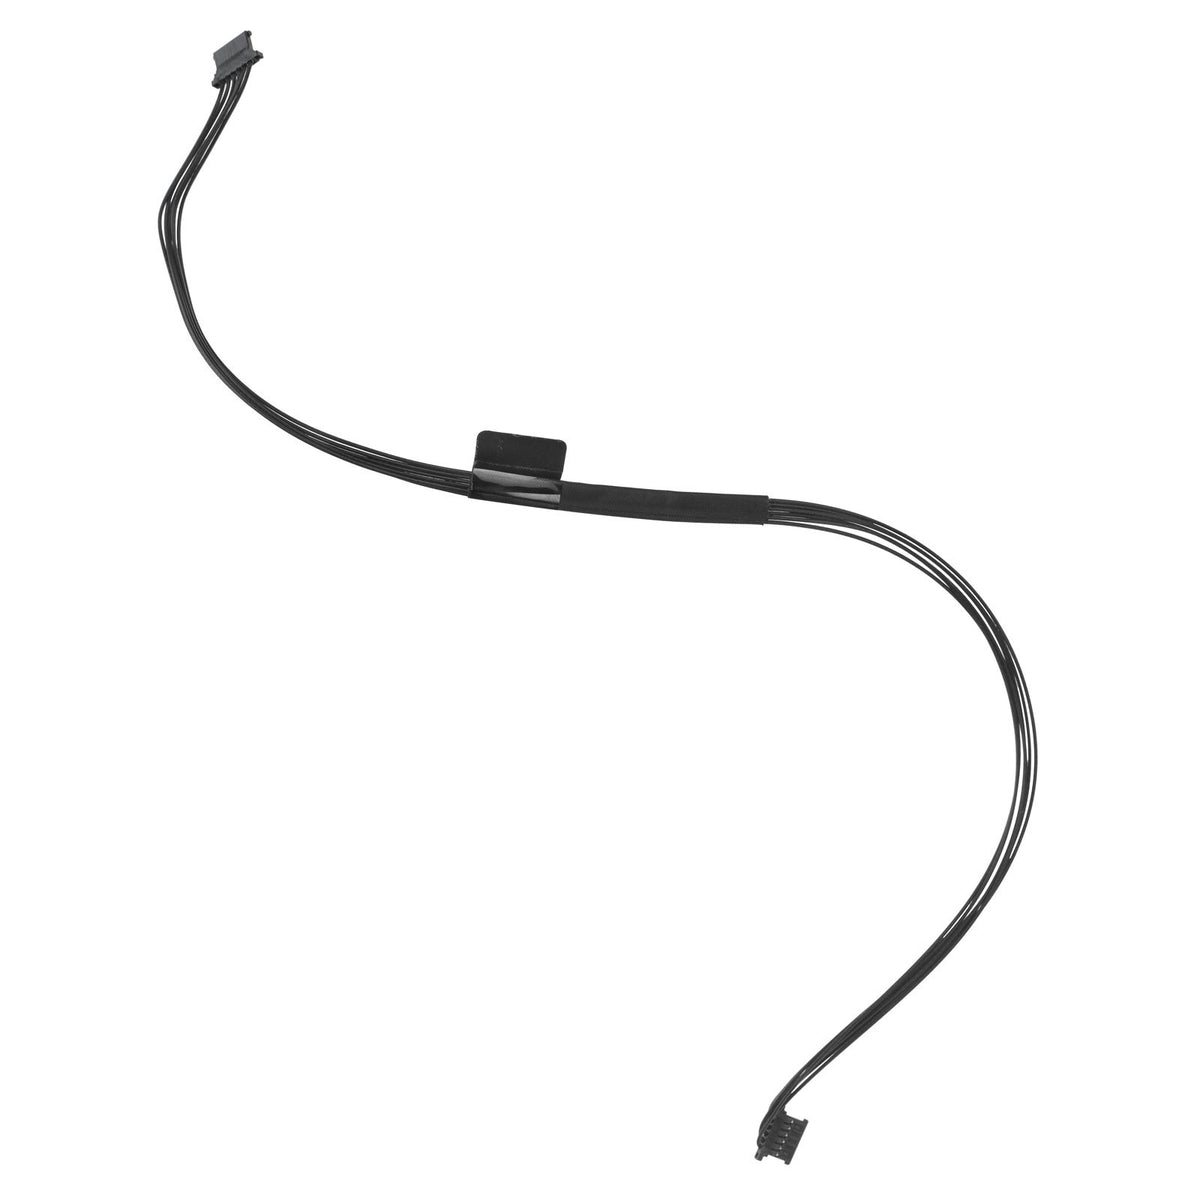 DISPLAY PORT POWER CABLE  FOR IMAC 21.5" A1311 (MID 2011 - LATE 2011)